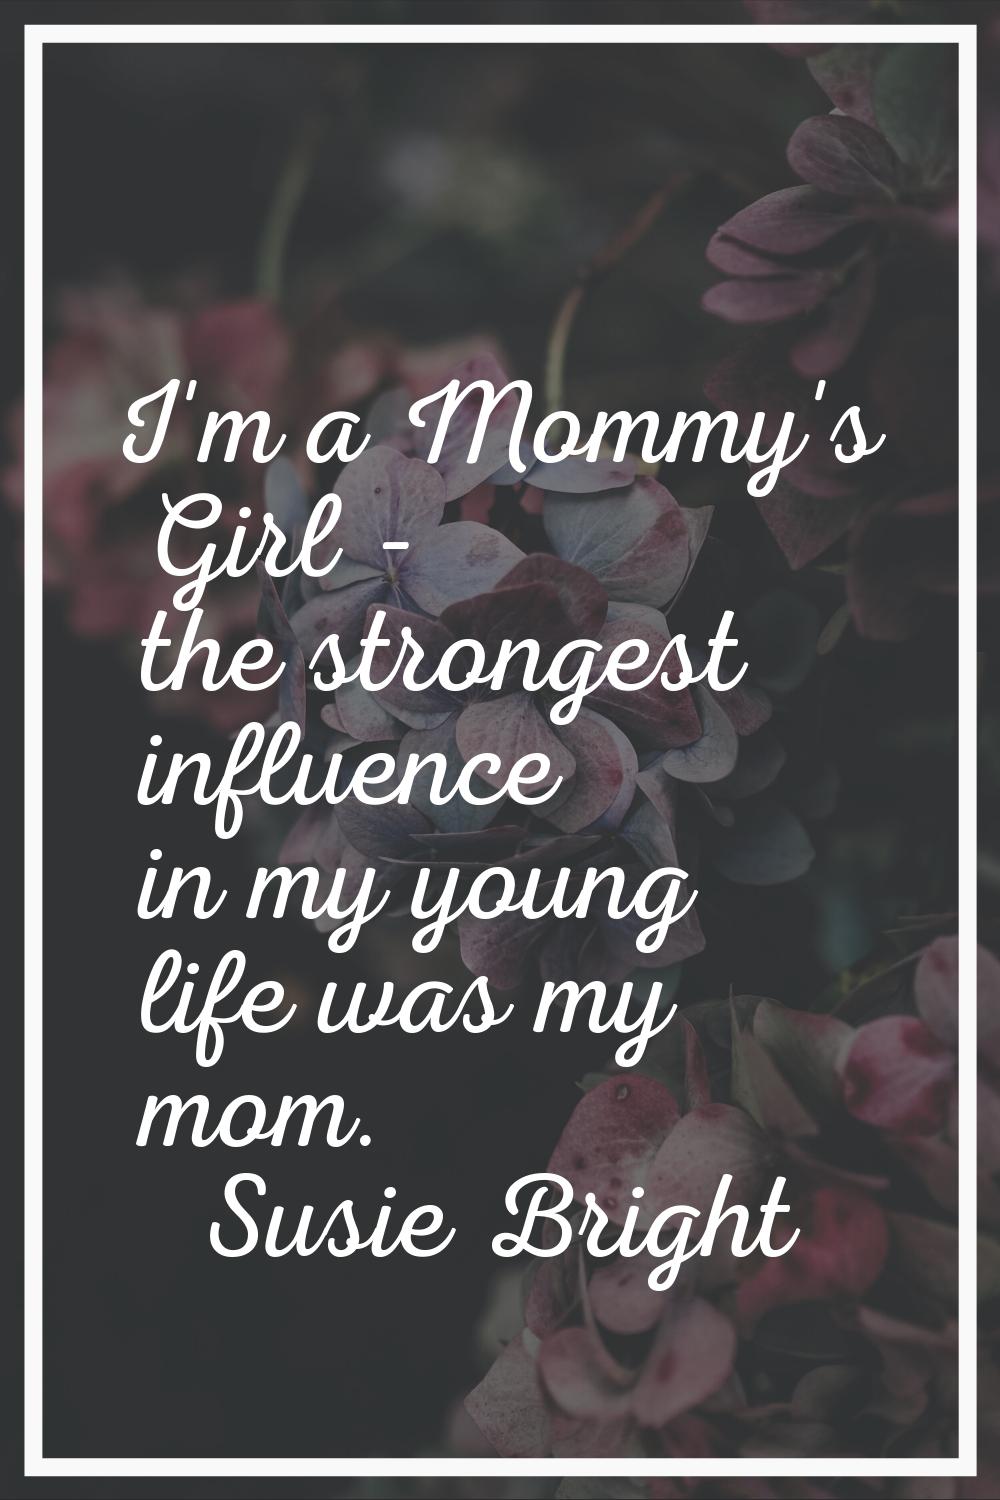 I'm a Mommy's Girl - the strongest influence in my young life was my mom.